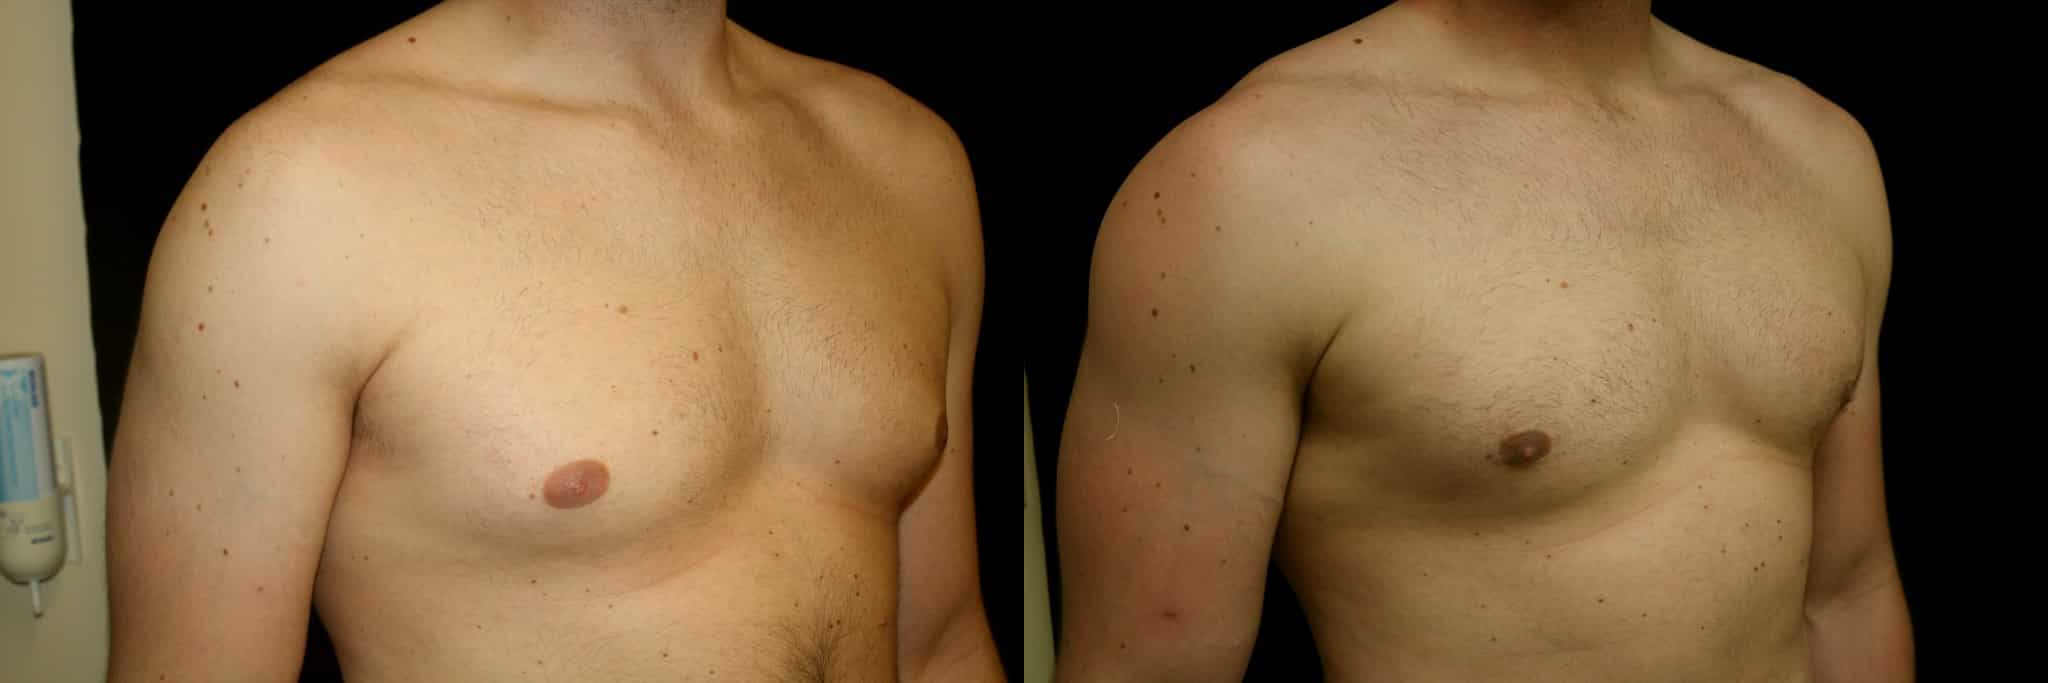 Gynecomastia Patient 8 Before & After Details